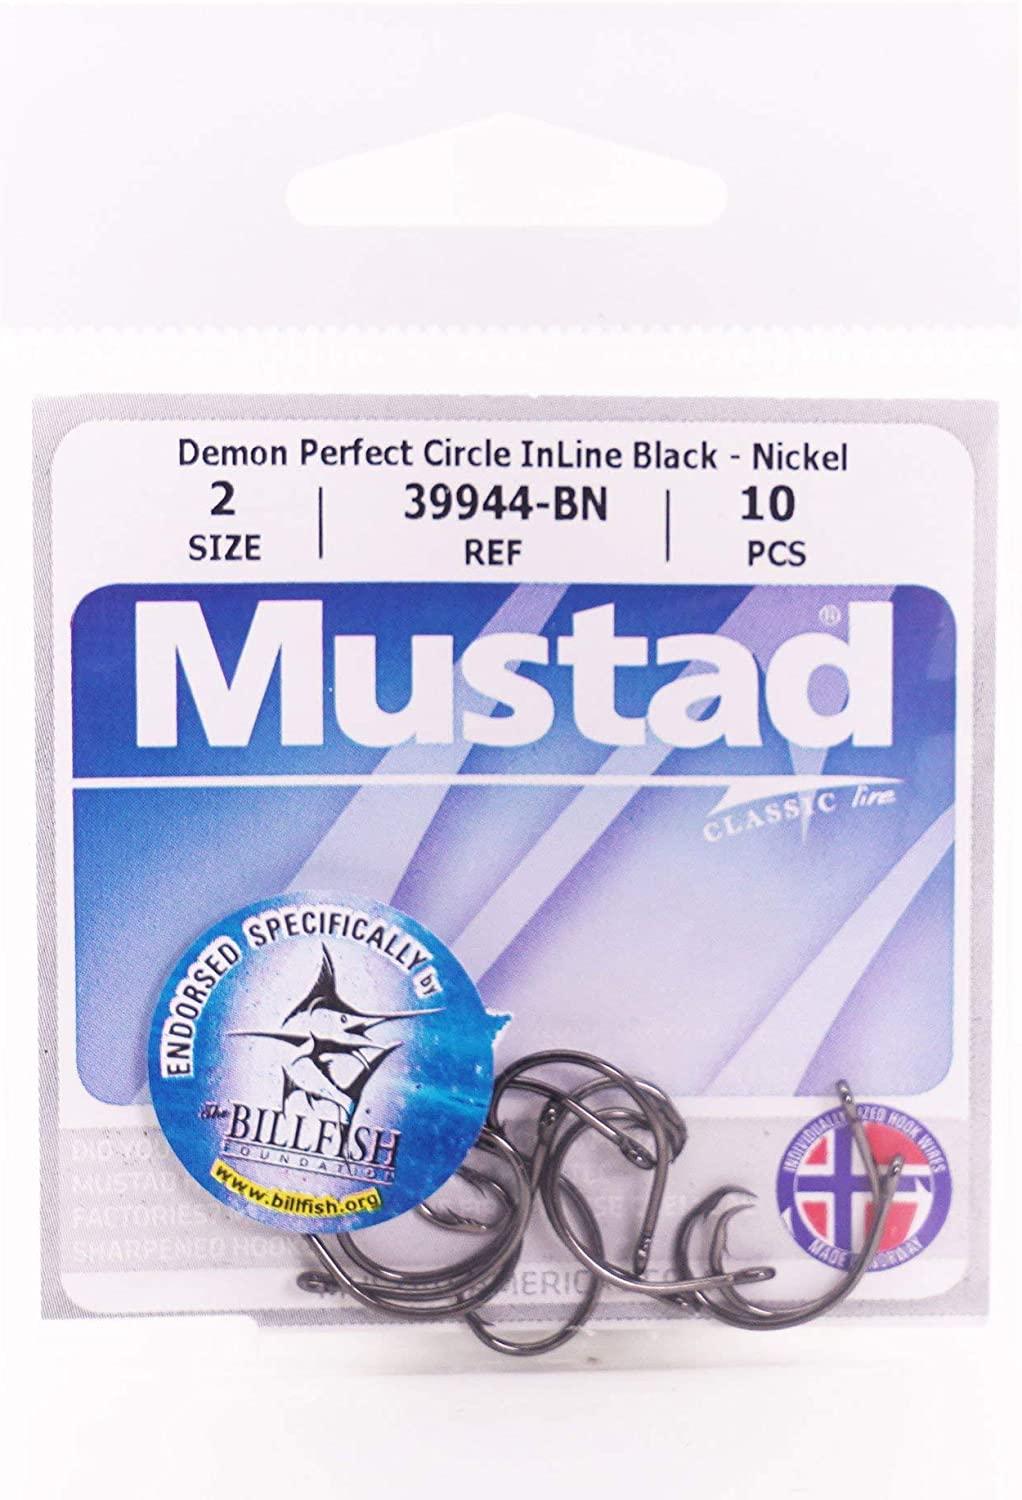 Mustad Classic 39944 Standard Wire Demon Perfect In Line Wide Gap Circle  Hook  Saltwater Freshwater hooks for Tuna, Catfish, Bass and more Size 2,  Pack of 50 Black Nickel